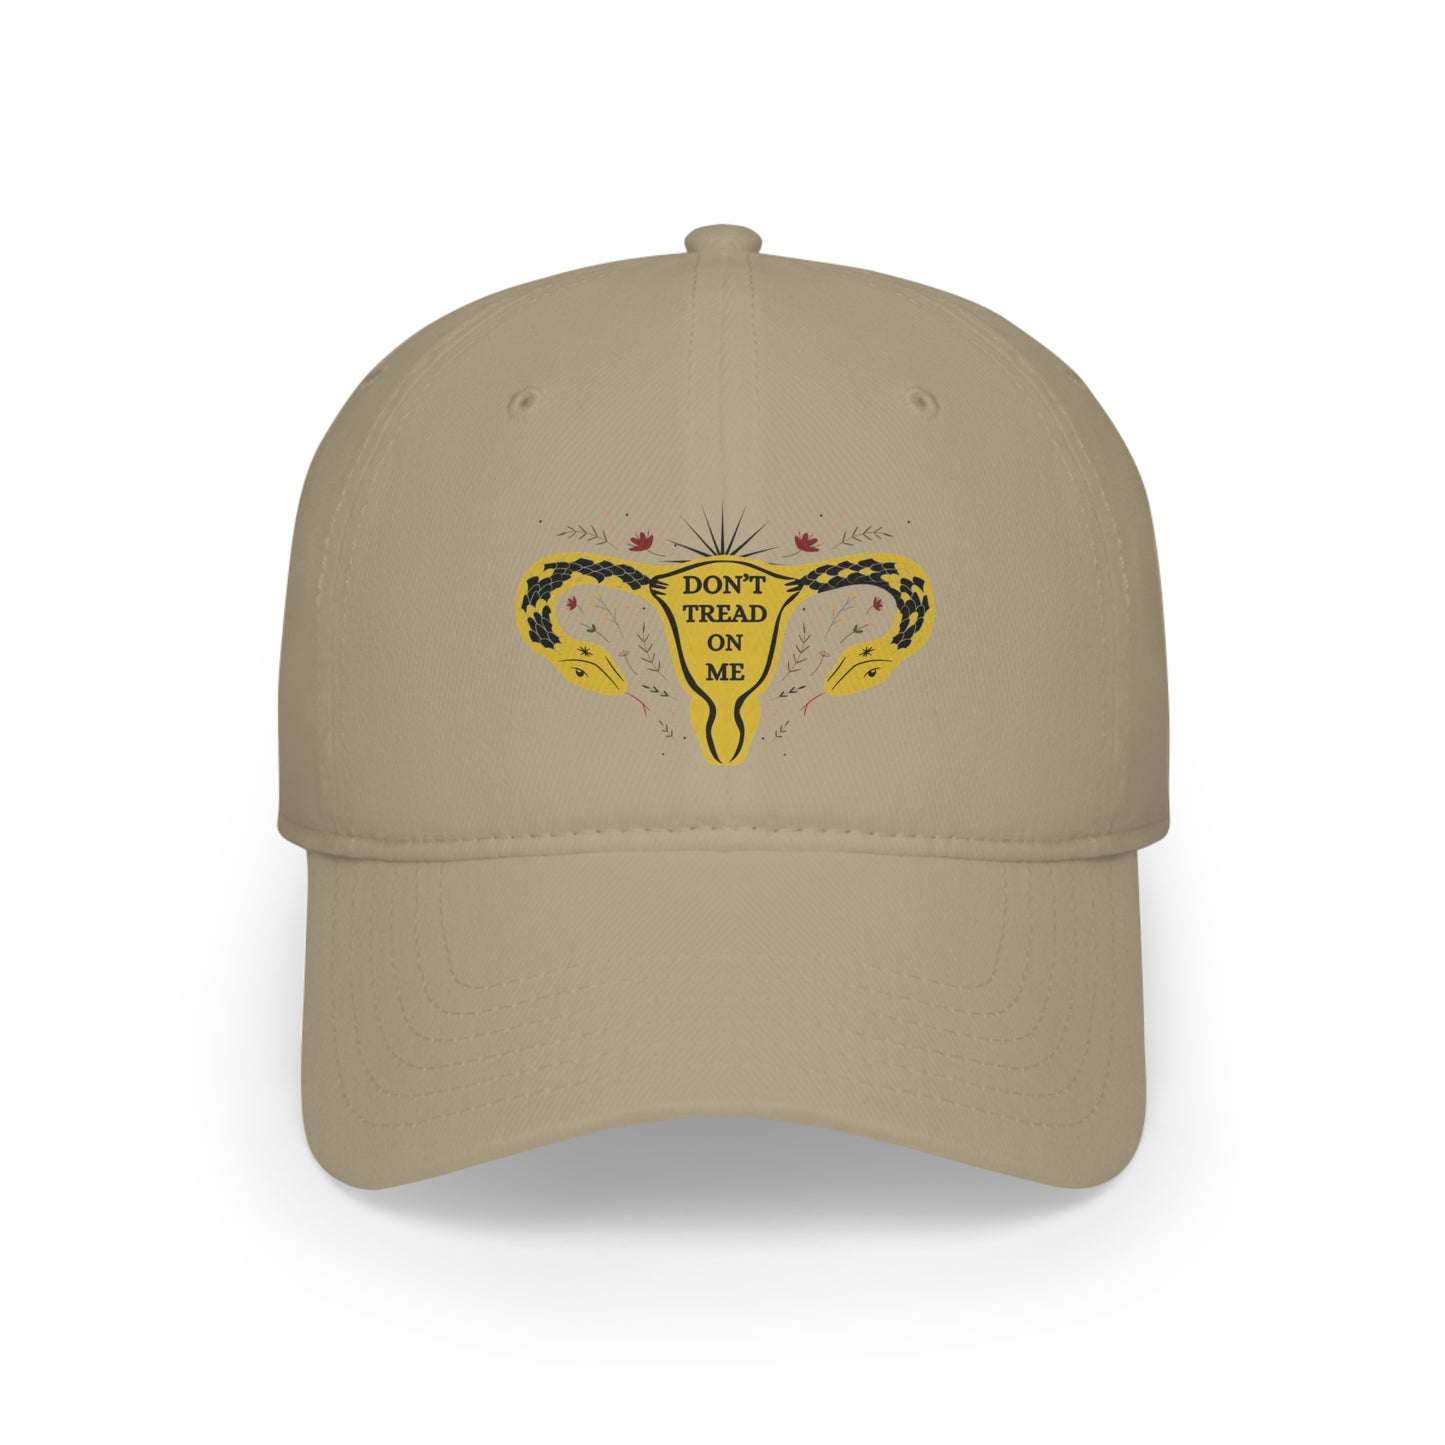 "Don't Tread on Me" Hat